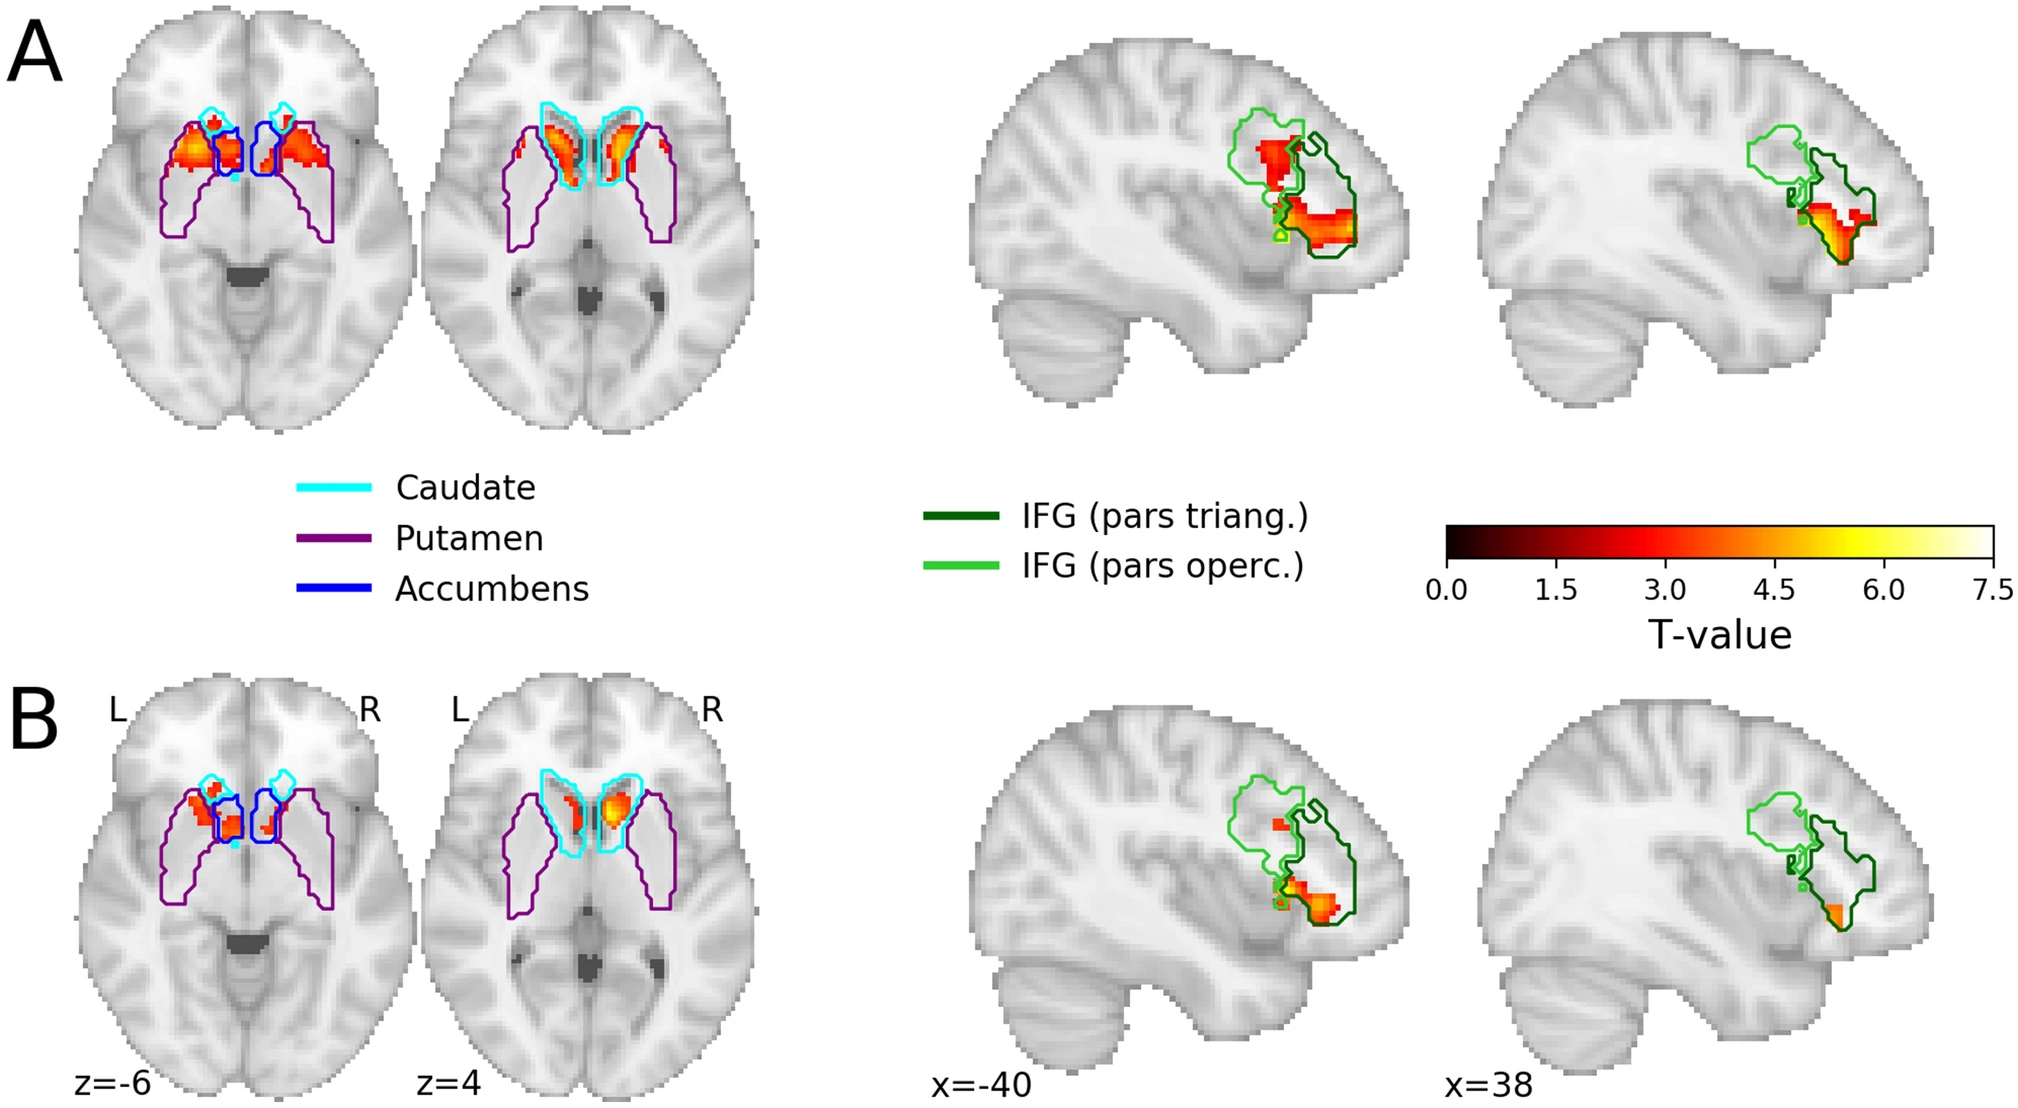 Results of confirmatory ROI analyses for the induction phase (A) the contrast negativeactive>passive (B) the contrast negativeactive>passive > positiveactive>passive. Voxels in red/yellow represent significant t-values (p < 0.05, corrected for multiple comparisons using the maximum statistic approach). The colored outlines represent the different brain regions within the probabilistic ROIs for the striatum (left) and inferior frontal gyrus (IFG; right). The outlines represent the border of the ROIs thresholded at 0. When voxels within one ROI had a nonzero probability in more than one brain region (e.g., the caudate and nucleus accumbens), the voxel was assigned to the brain region with the largest probability.